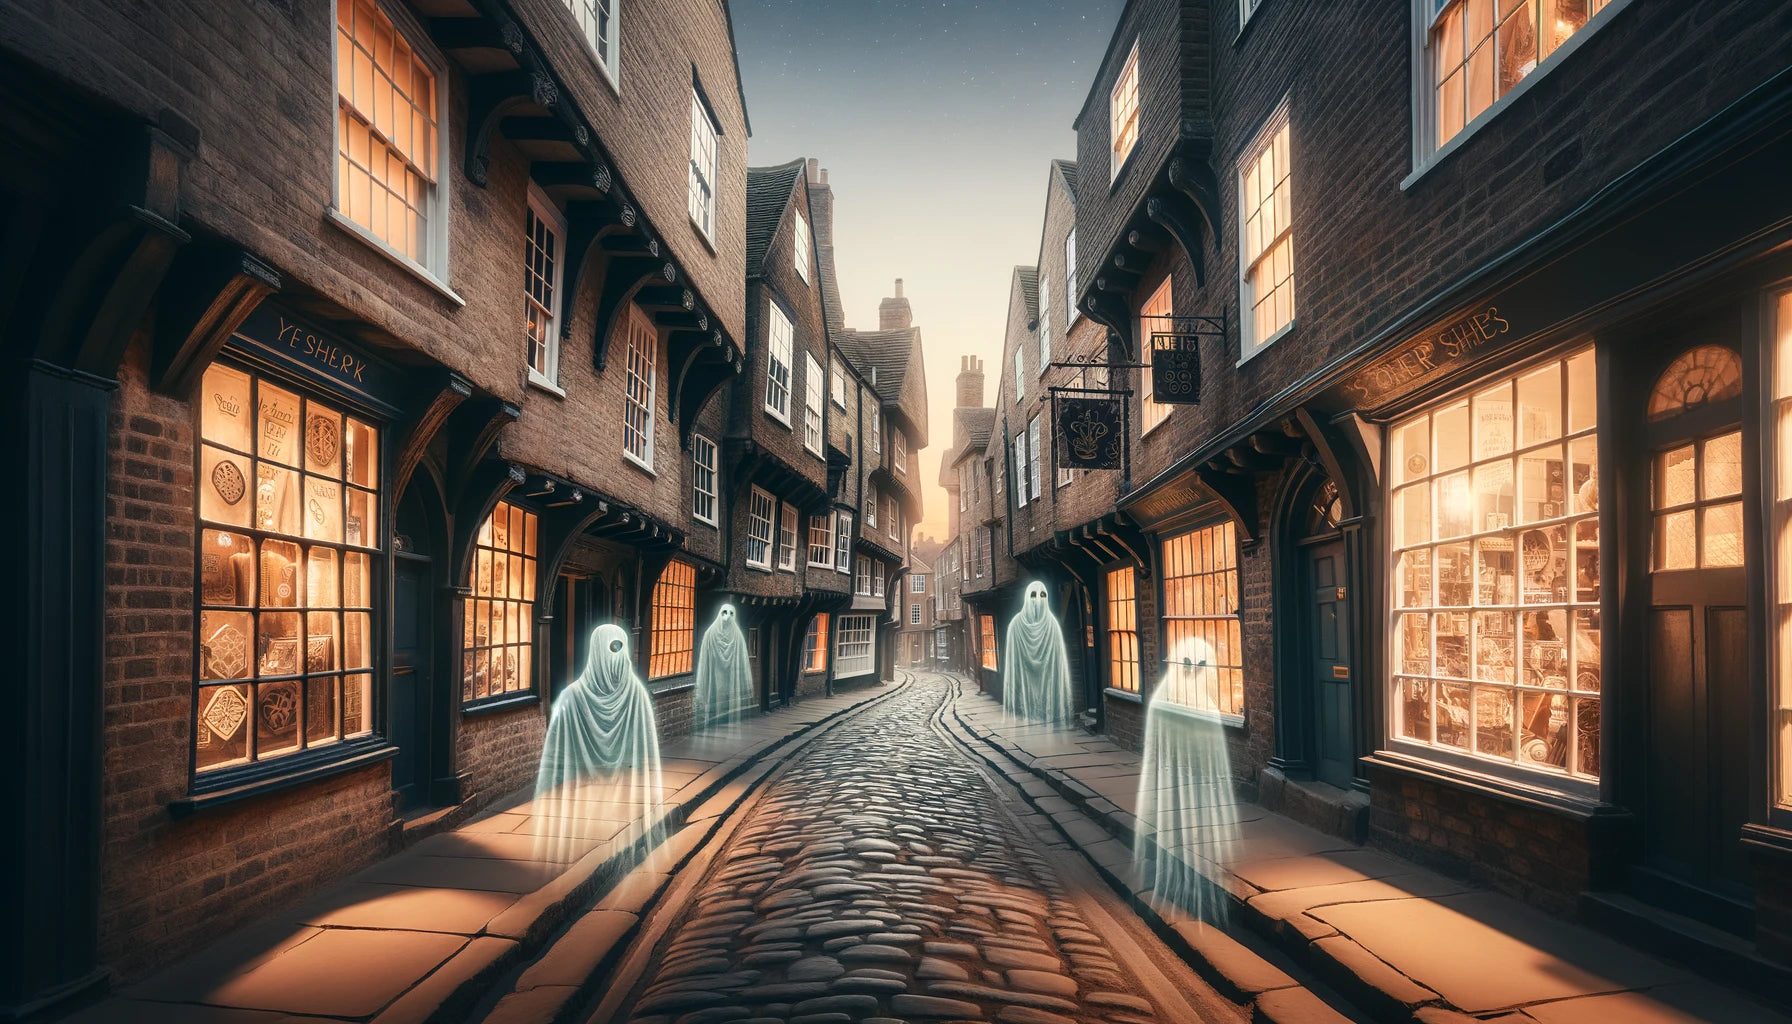 The Shambles with ghosts on the street, England, UK